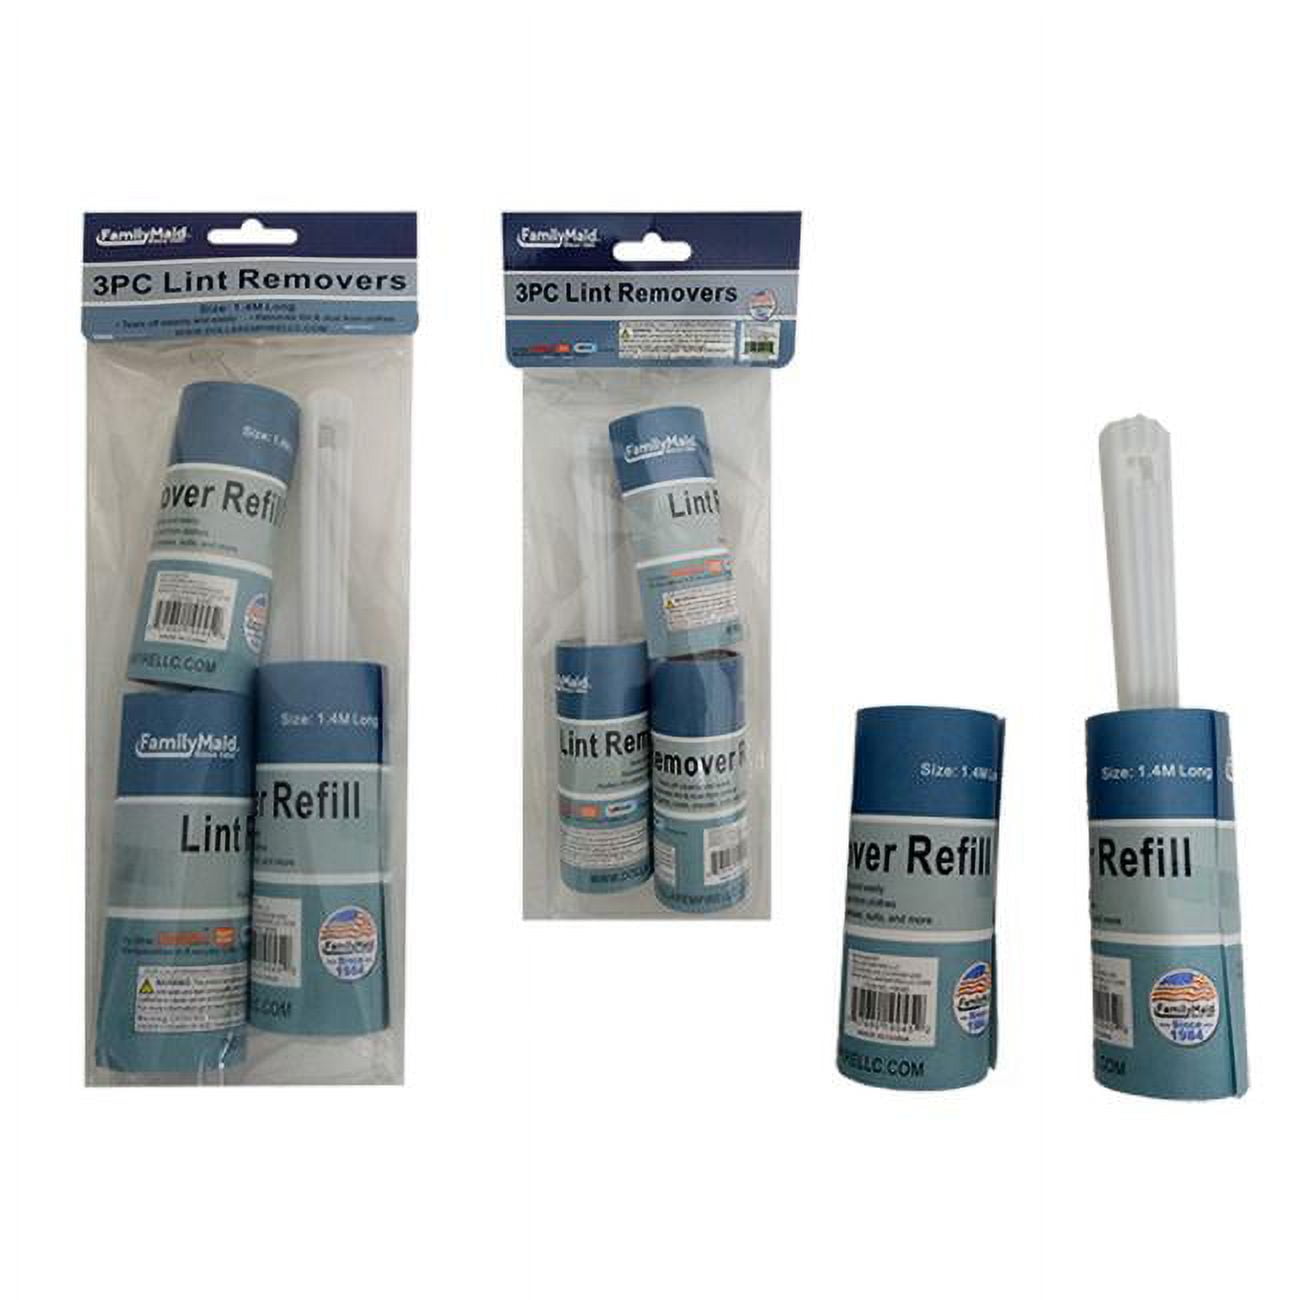 Picture of FamilyMaid 19045 1.4 m Lint Remover with Refill - 3 Piece